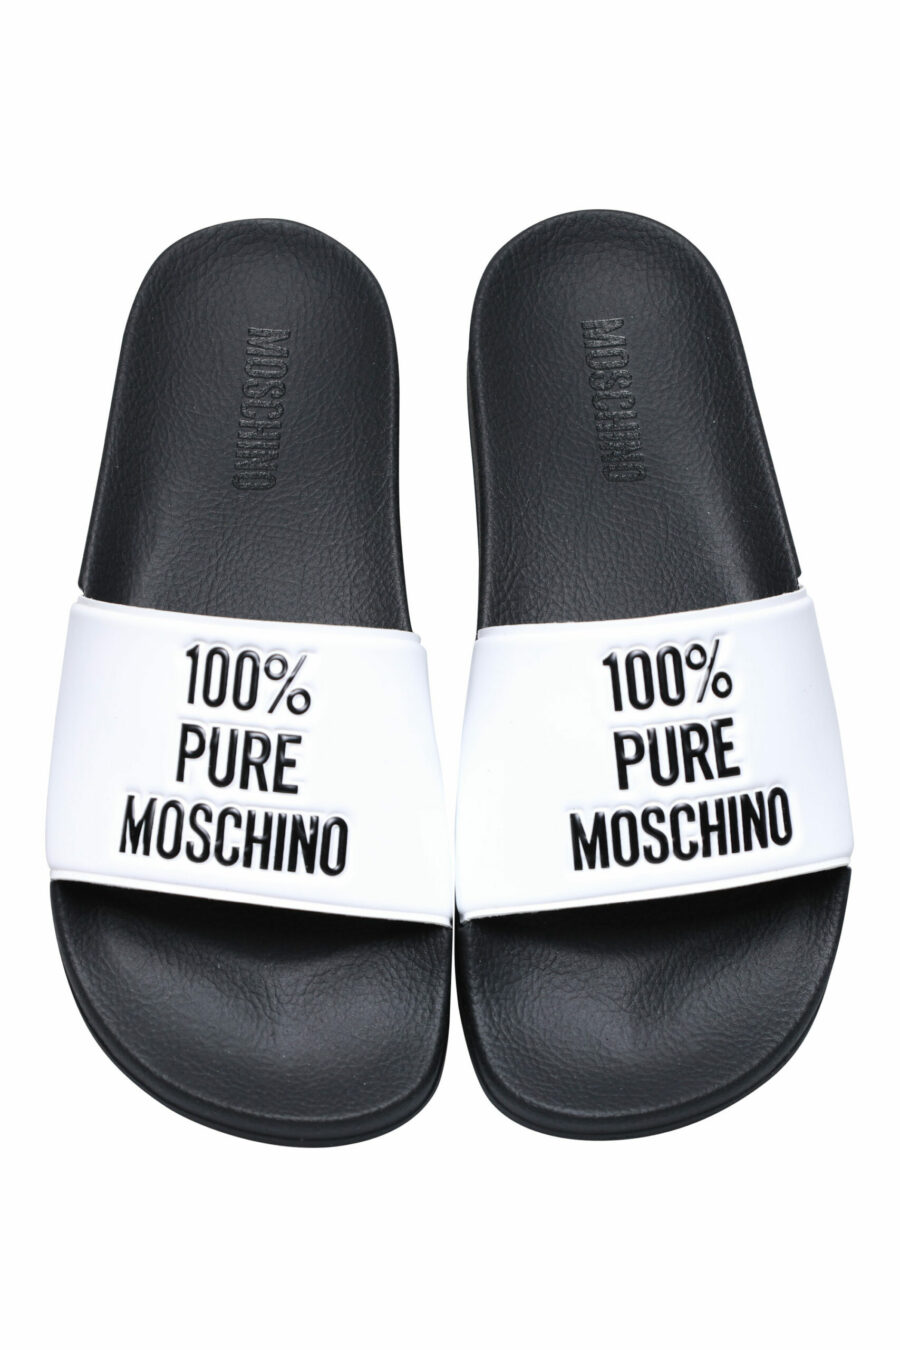 White flip flops with logo "100% pure moschino" - 8054388534581 3 scaled